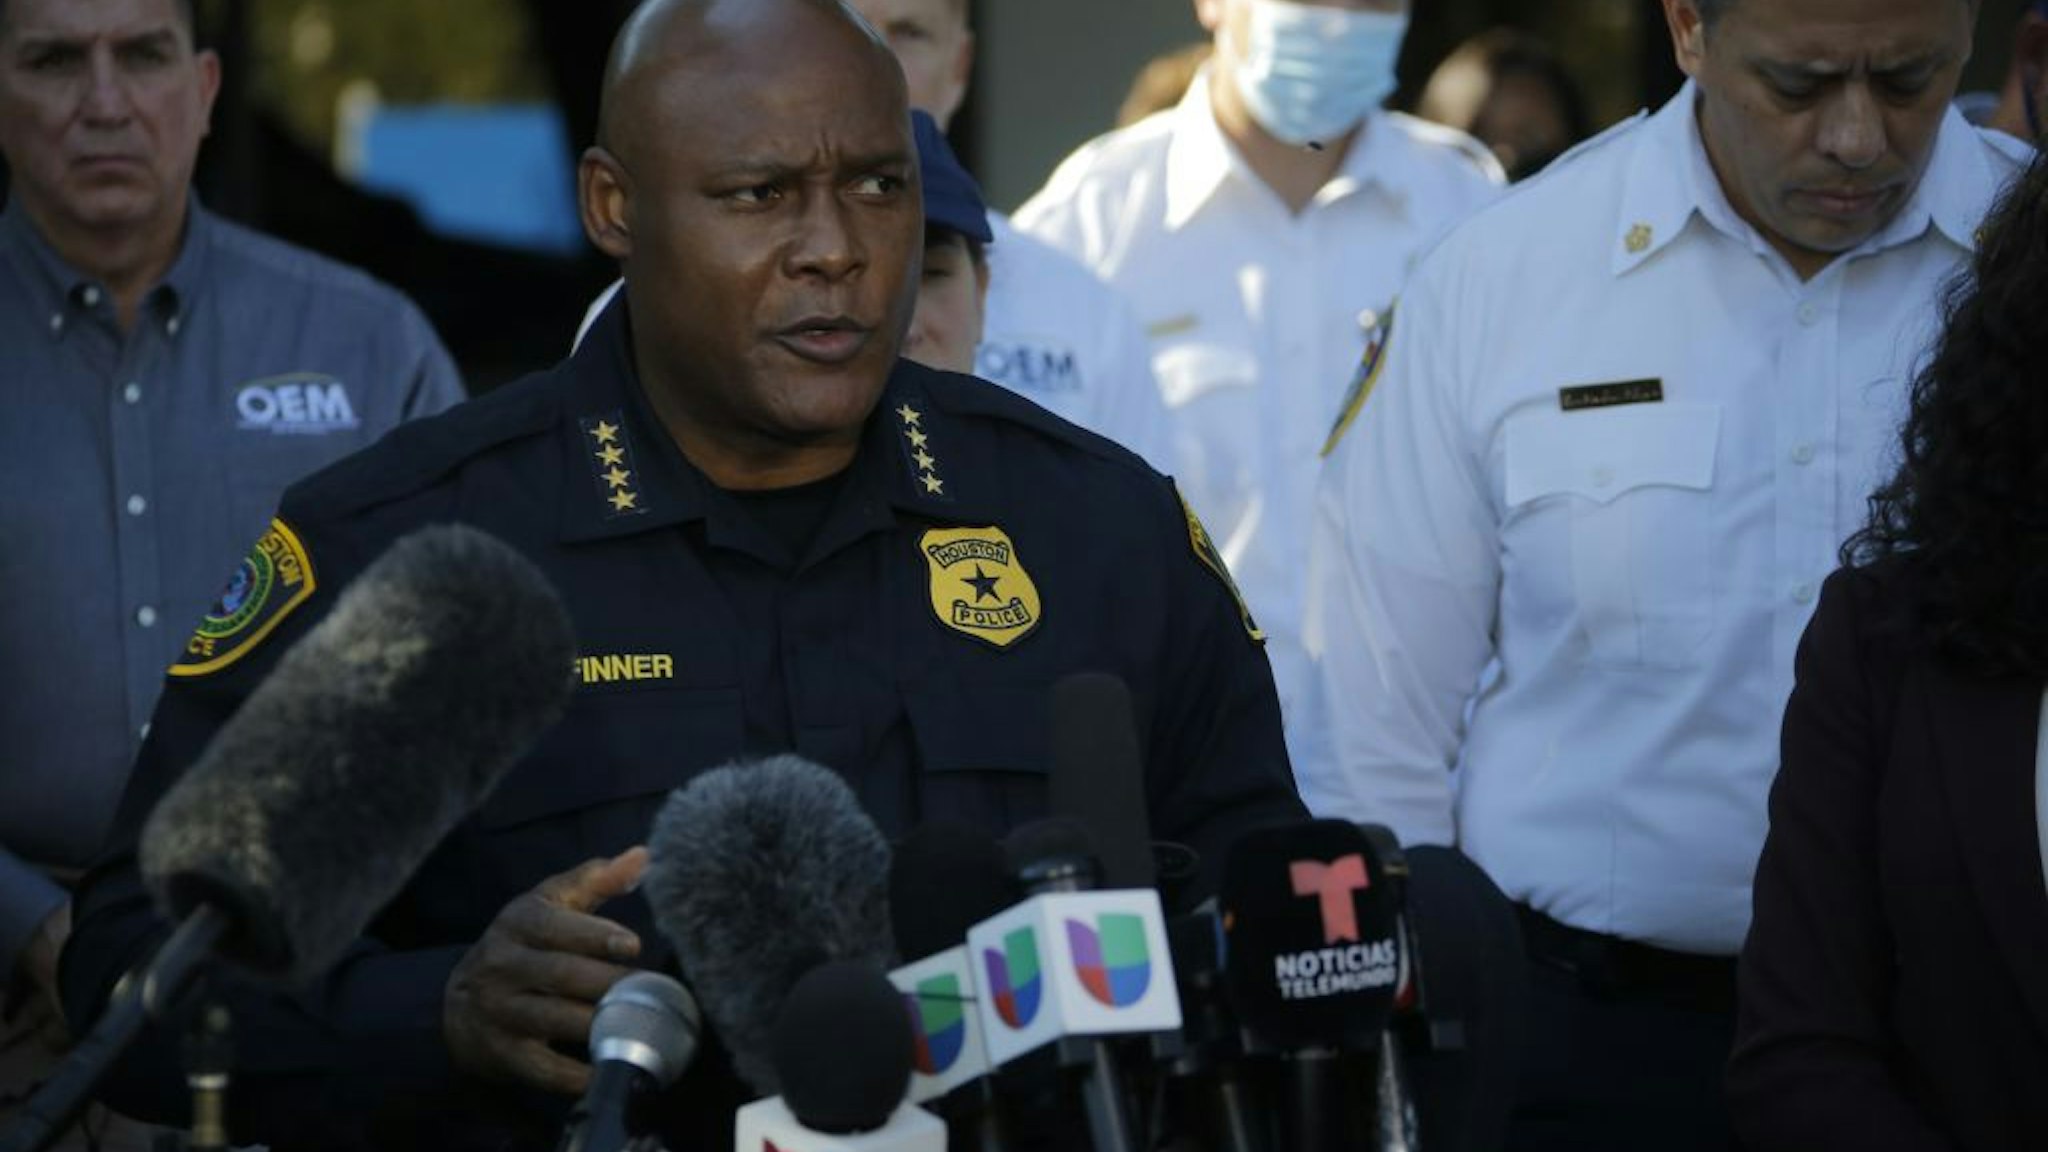 Houston Police Chief Troy Finner speaks during a press conference at the Wyndham Hotel in Houston, Texas, the United States, Nov. 6, 2021.